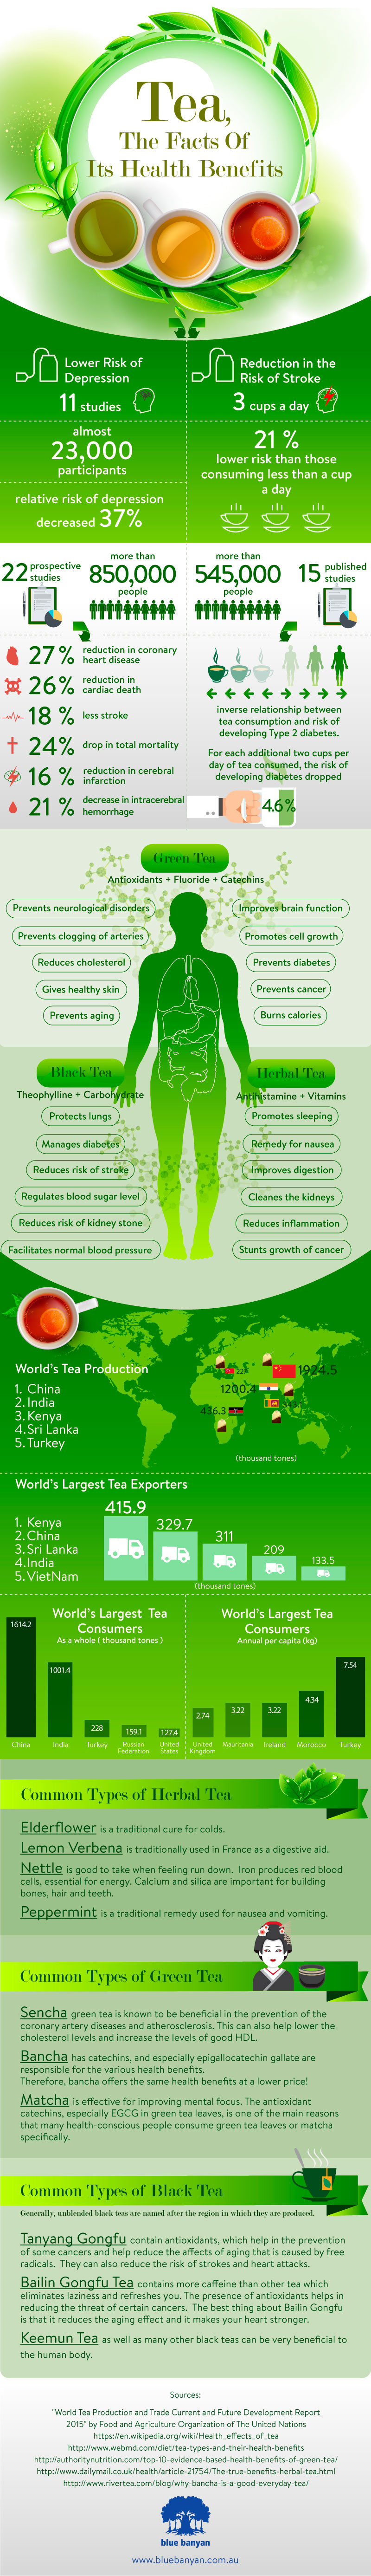 Surprising Facts About Tea And It’s Amazing Health Benefits Infographic